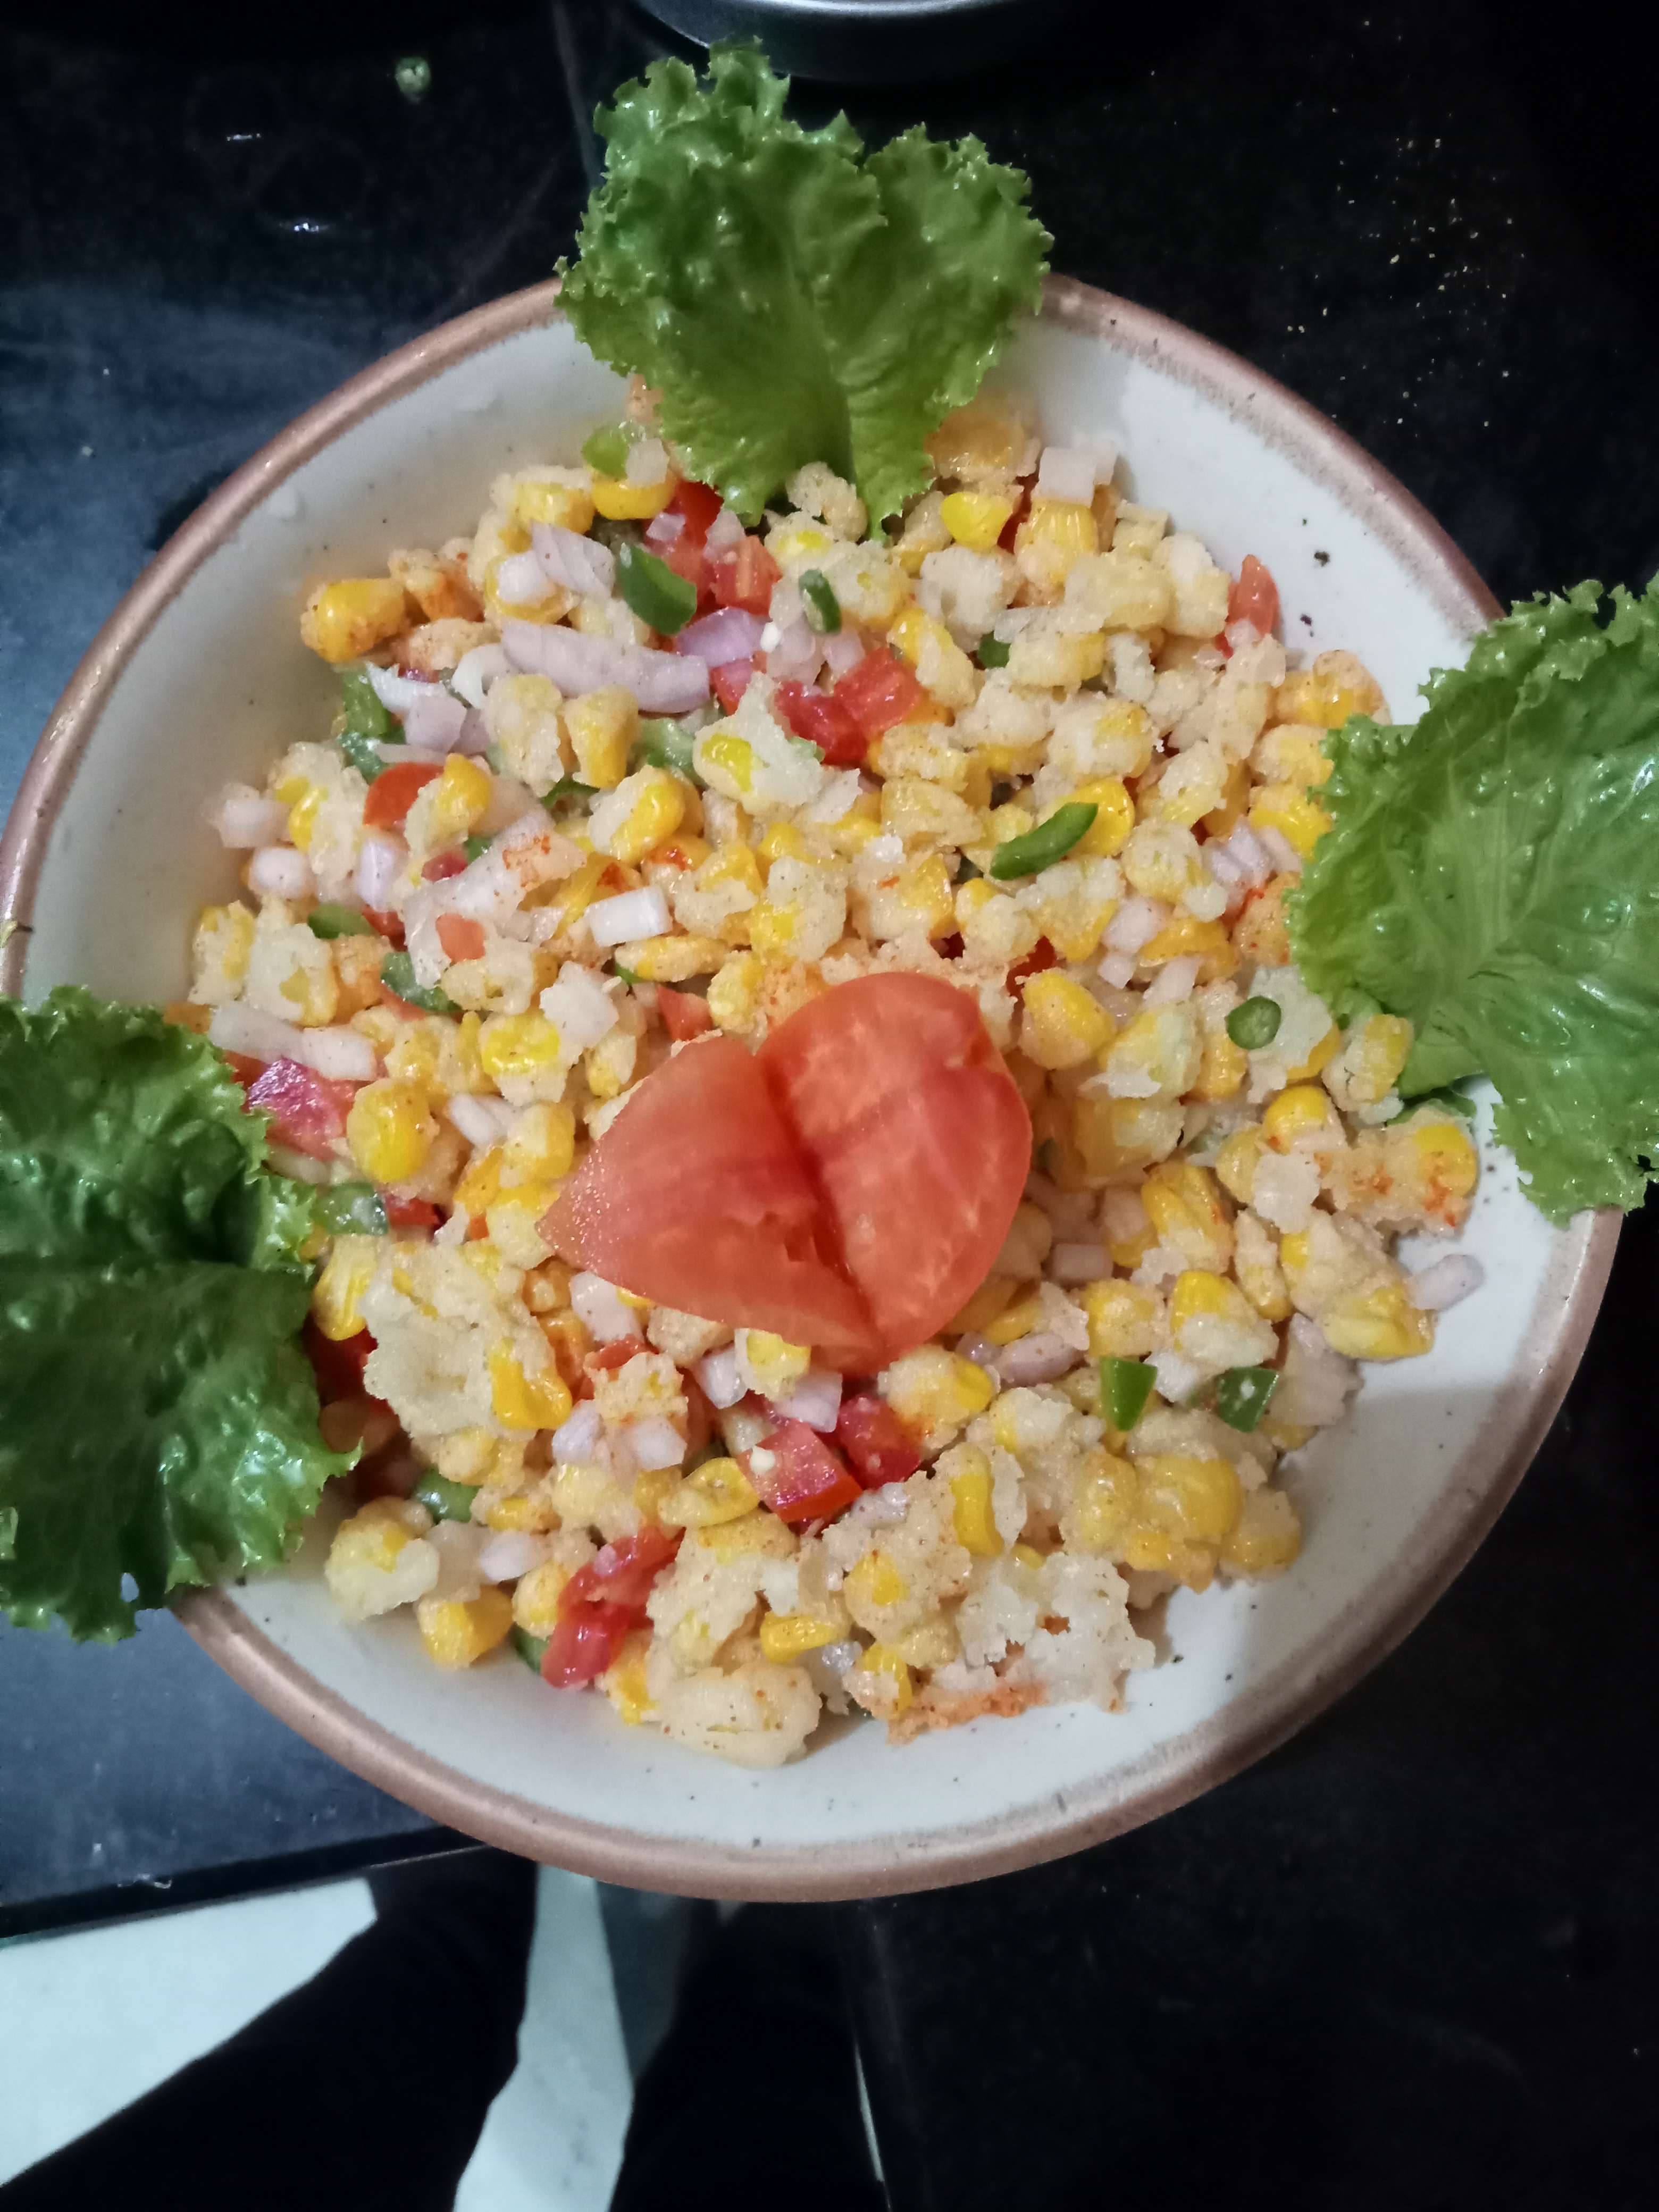 Tasty Corn Chaat cooked by COOX chefs cooks during occasions parties events at home